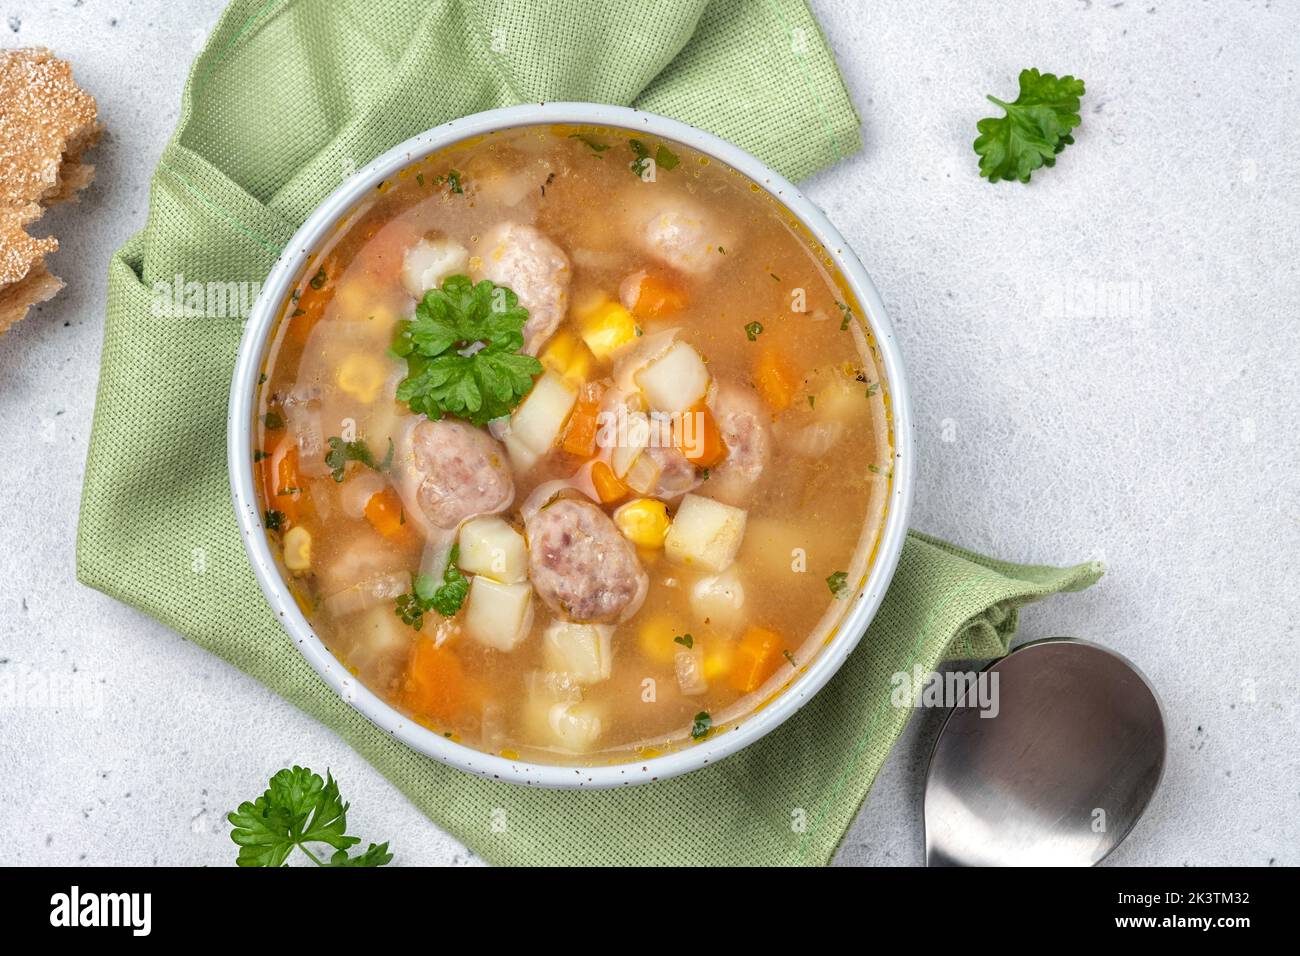 Chicken meatball soup with potato, carrot and corn Stock Photo